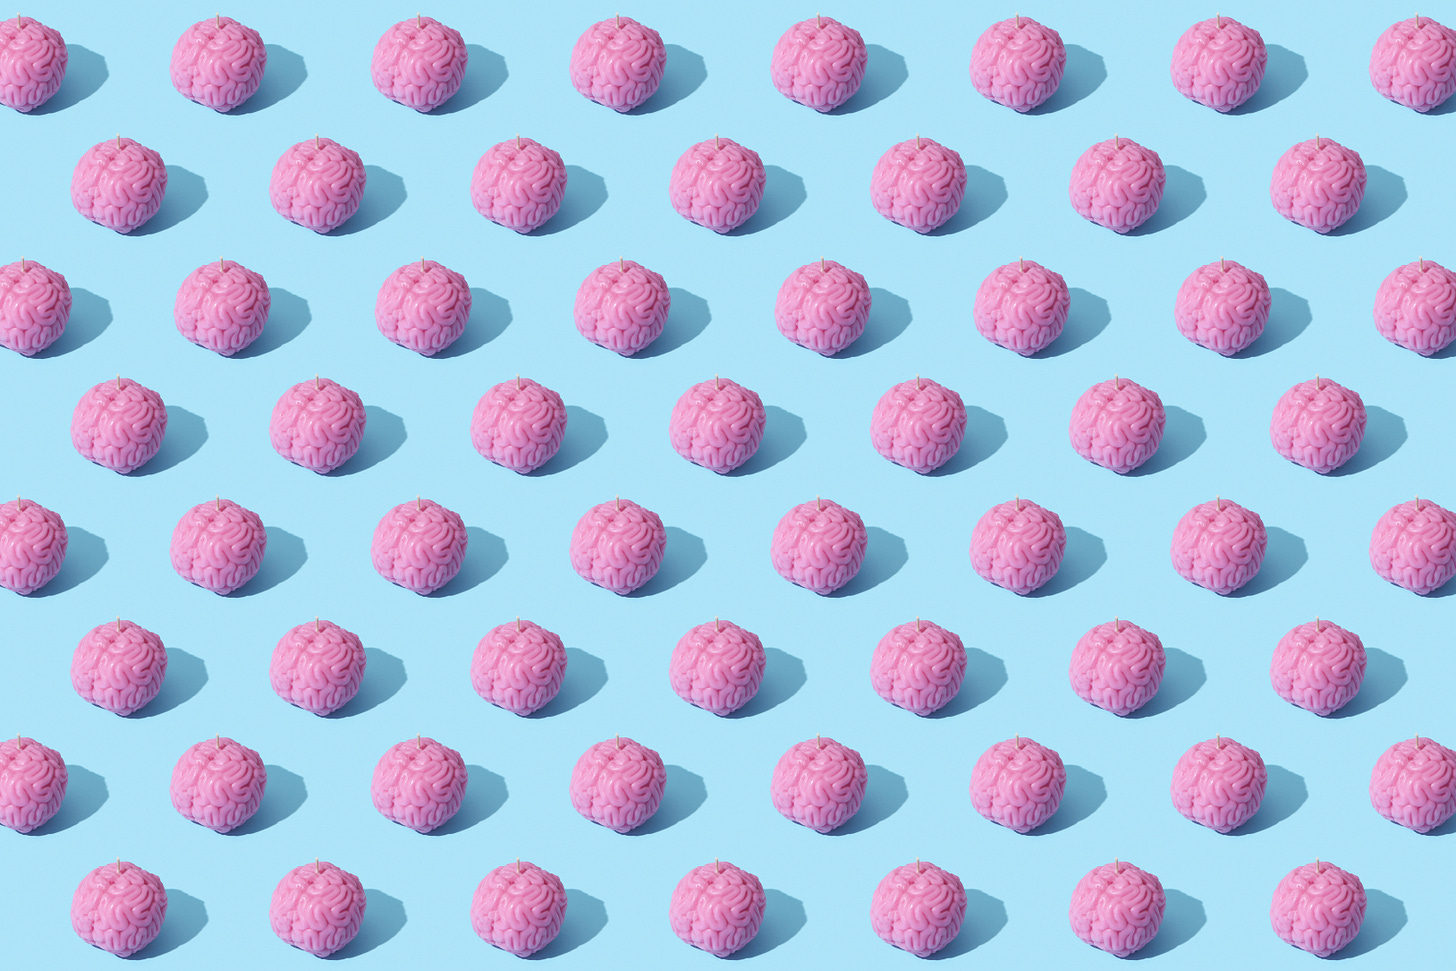 50-70 pink brains tiled on a pale blue background